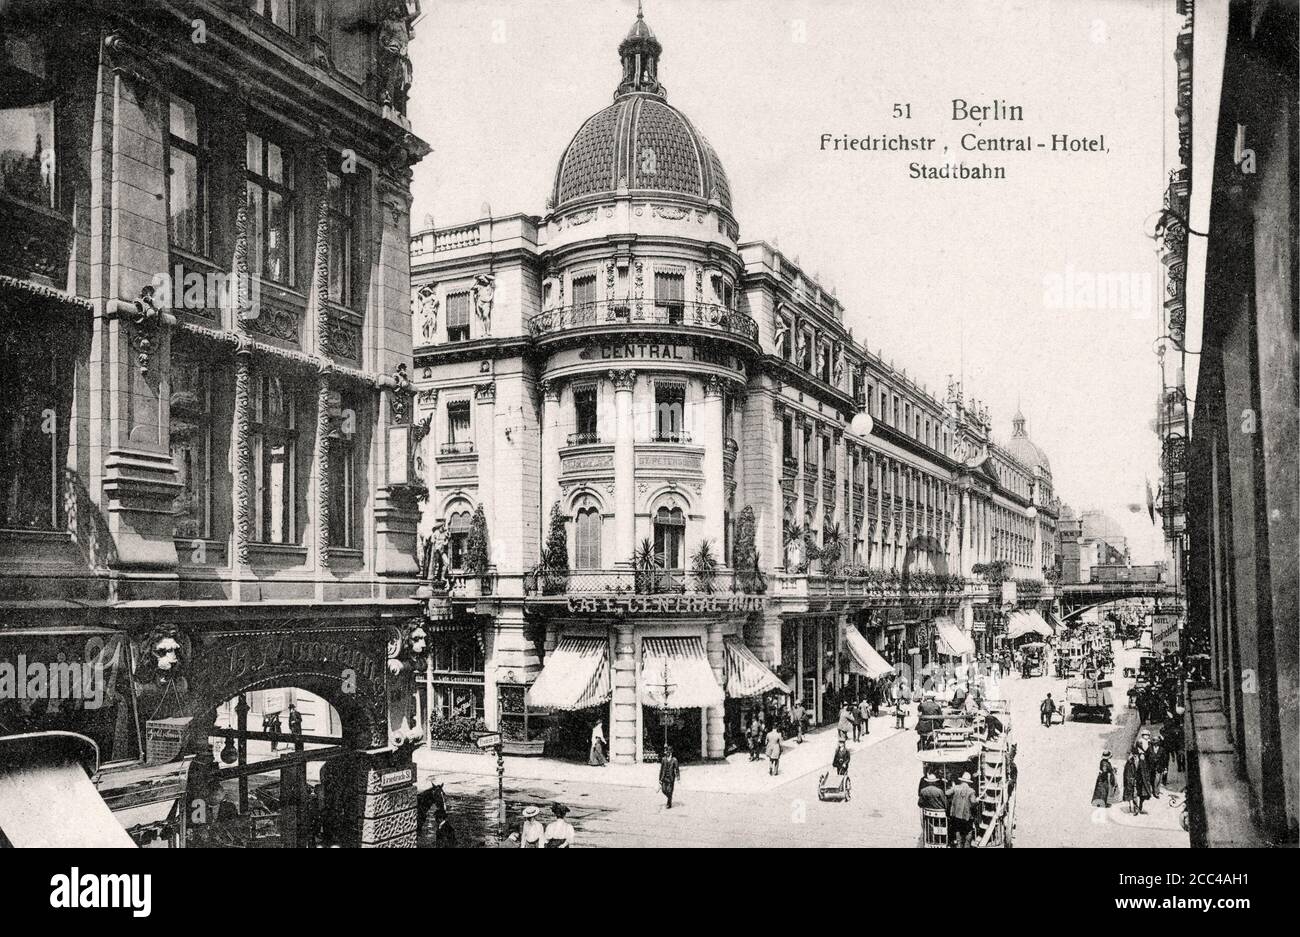 Retro postcard of Berlin. Central Hotel, Friedrichstrasse. Imperial Germany, early 1900s Stock Photo